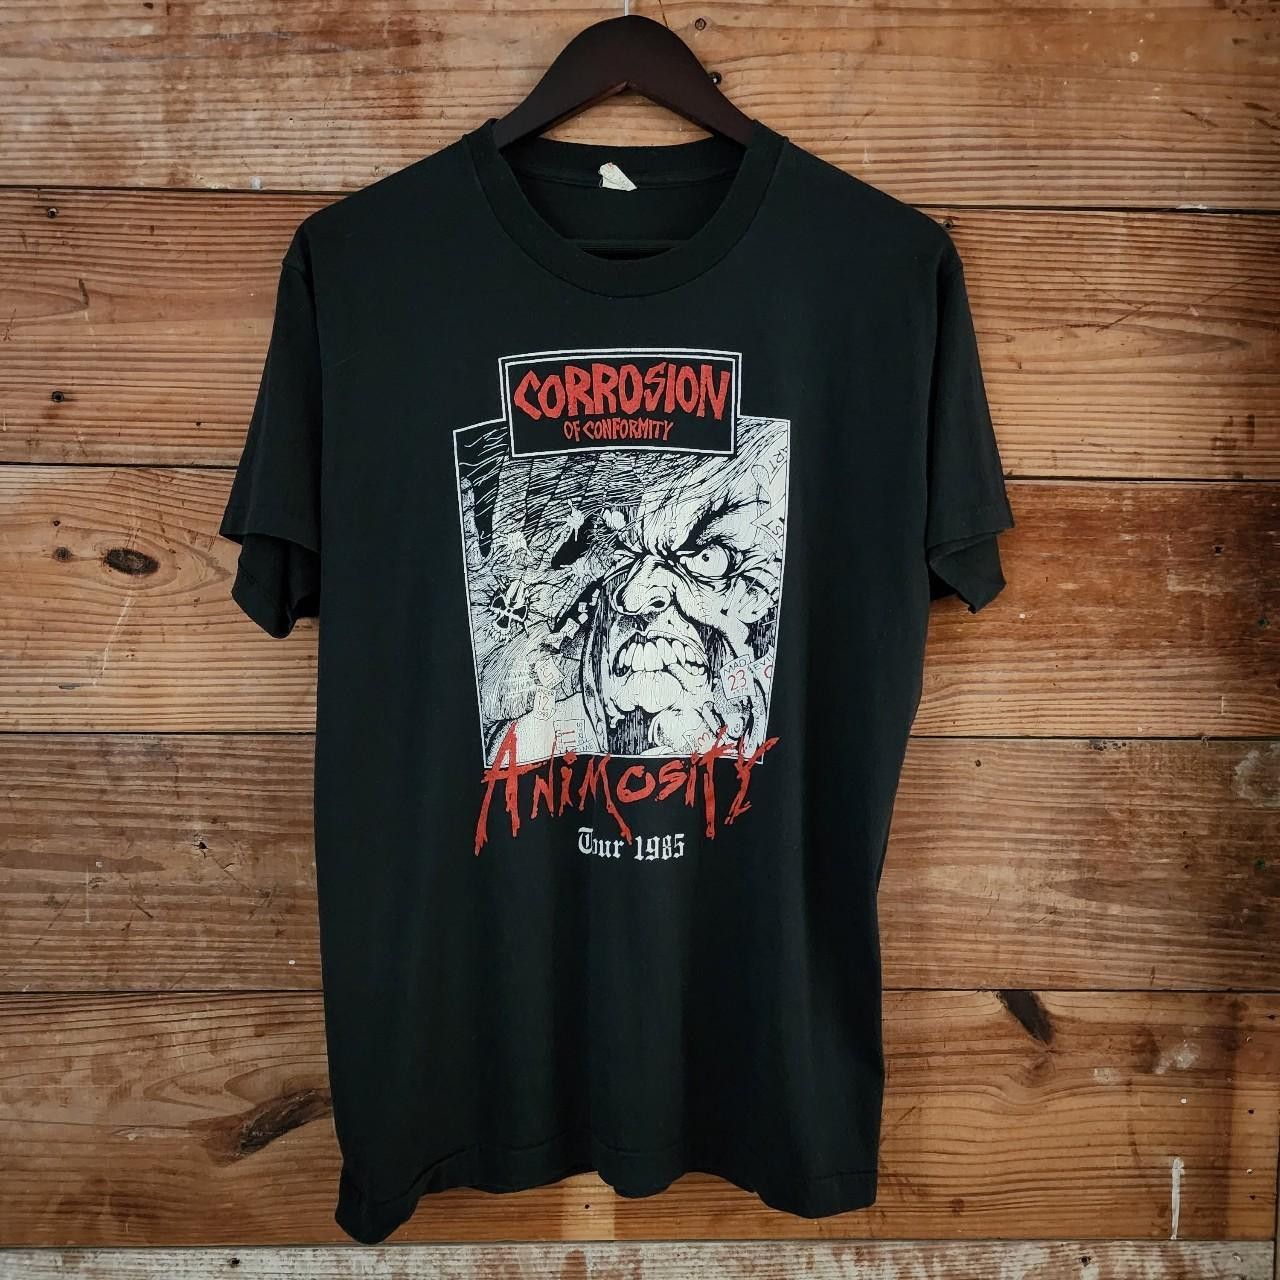 Vintage Corrosion of Conformity T Shirt 